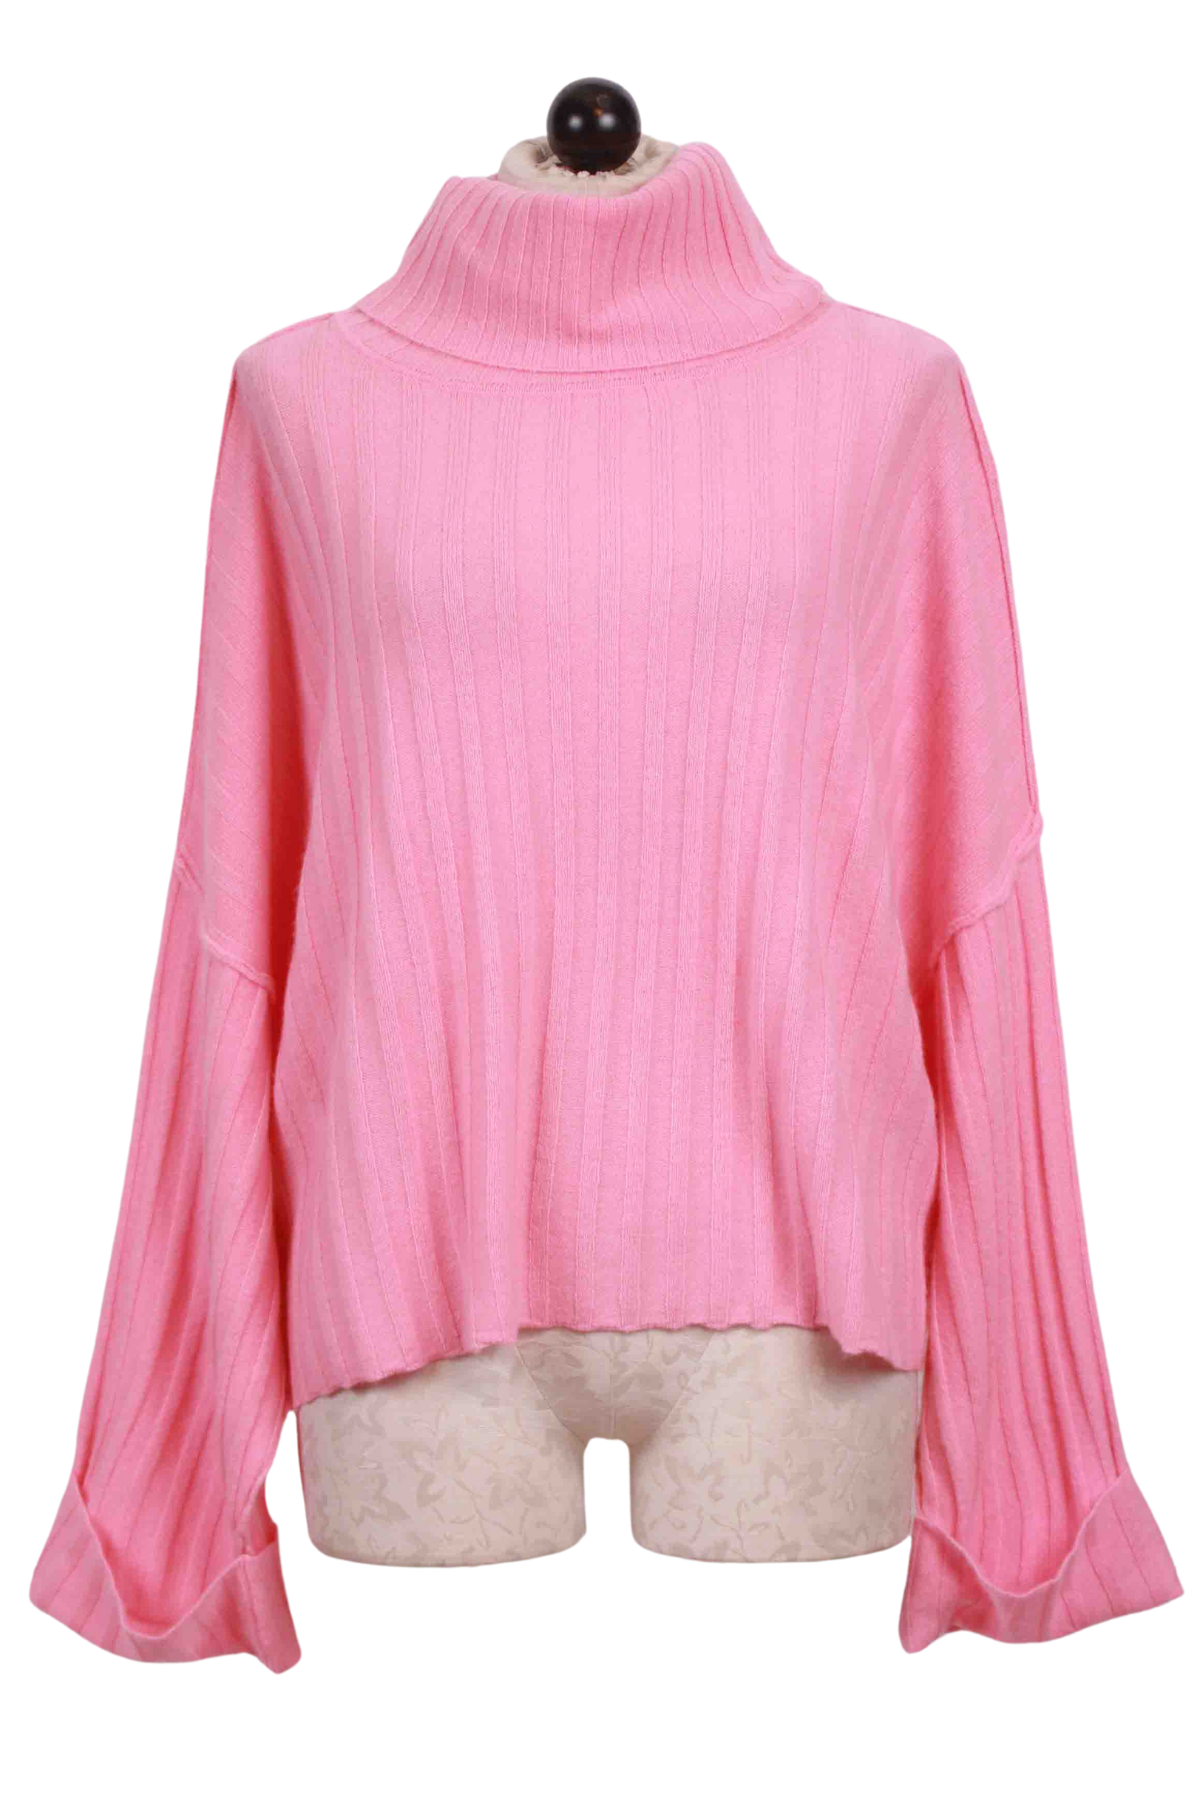 Bellini Pink Rosie Ribbed Roll Neck Sweater by Crush